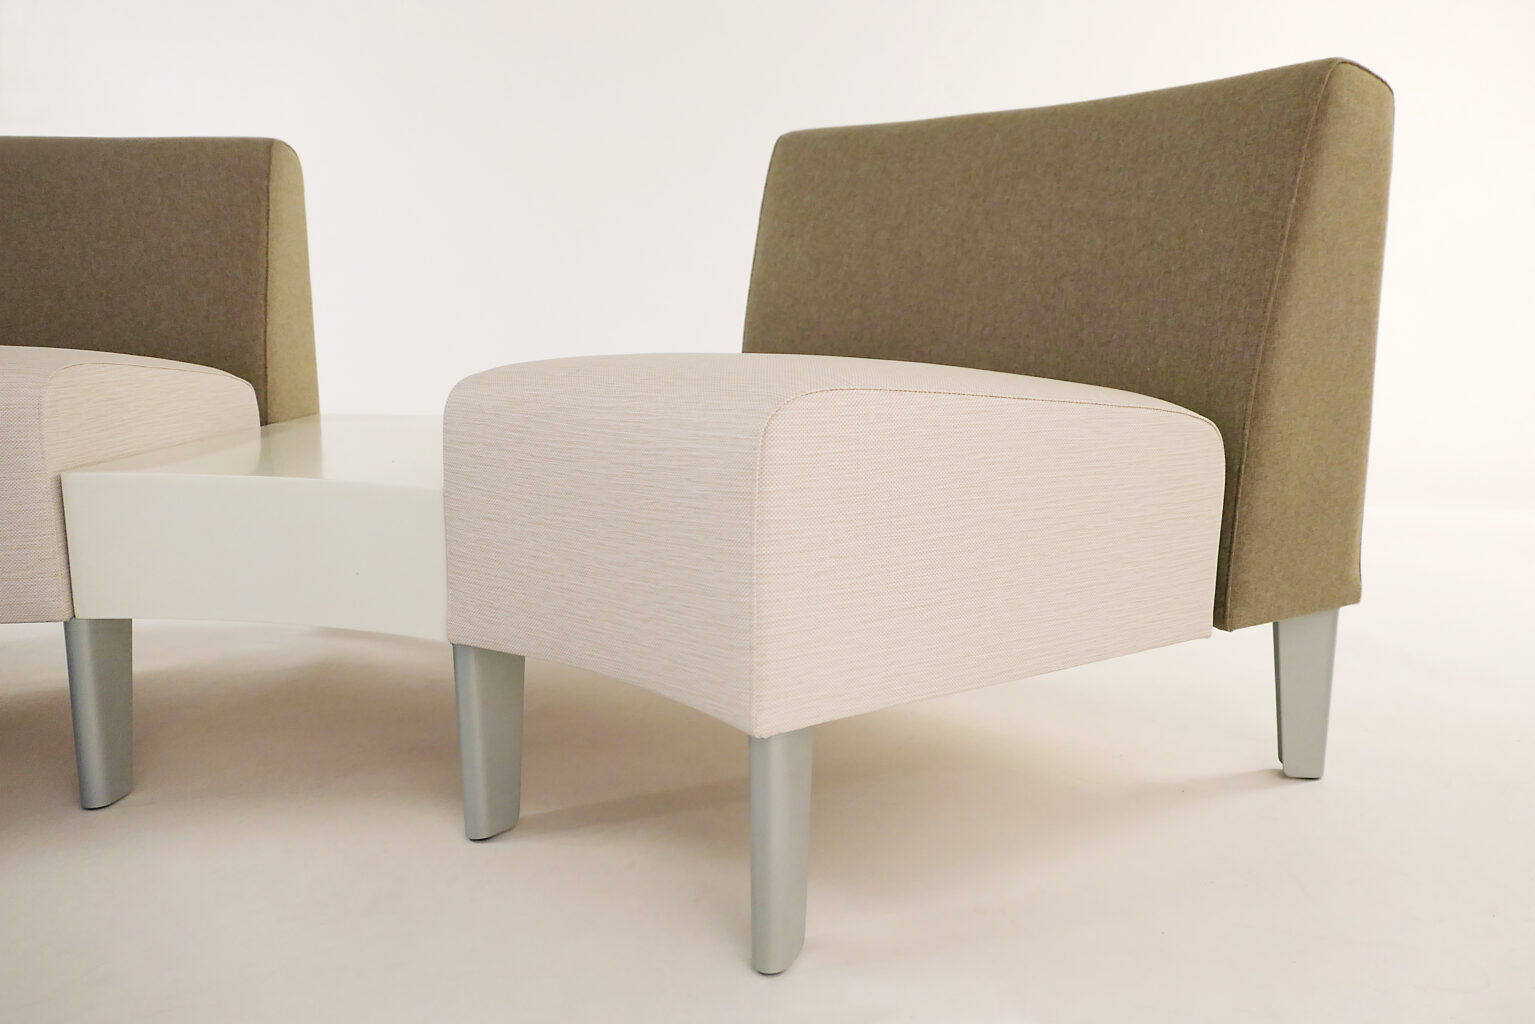 The Avila Series features standard removeable/field-replaceable upholstery covers.